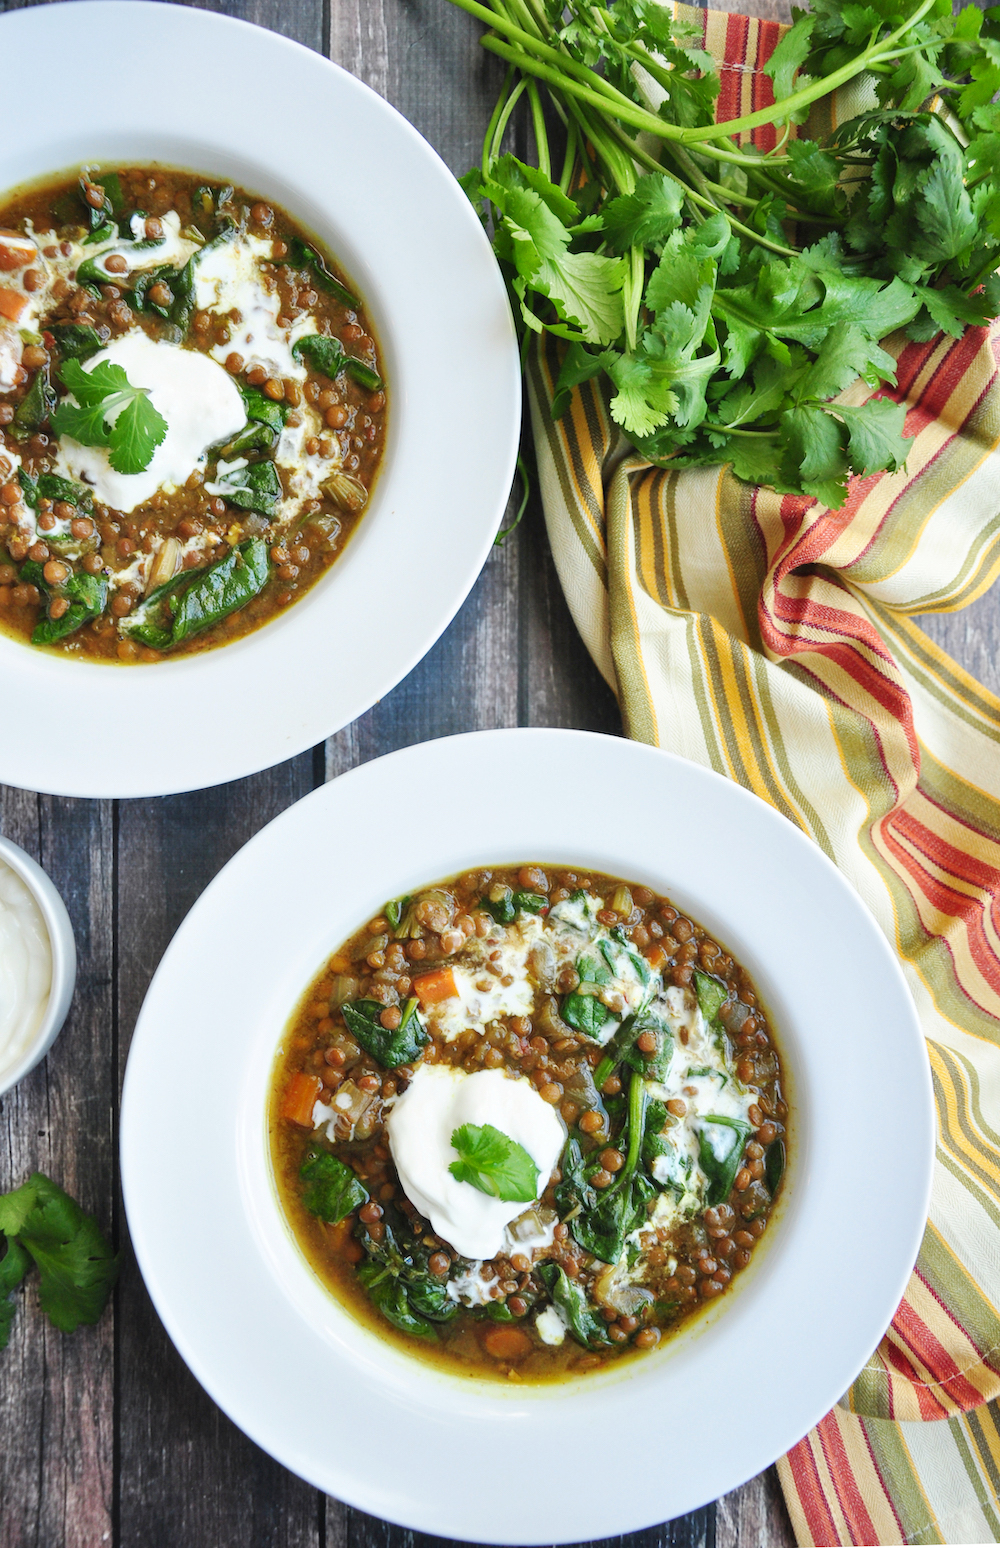 Curried Lentil Spinach Soup